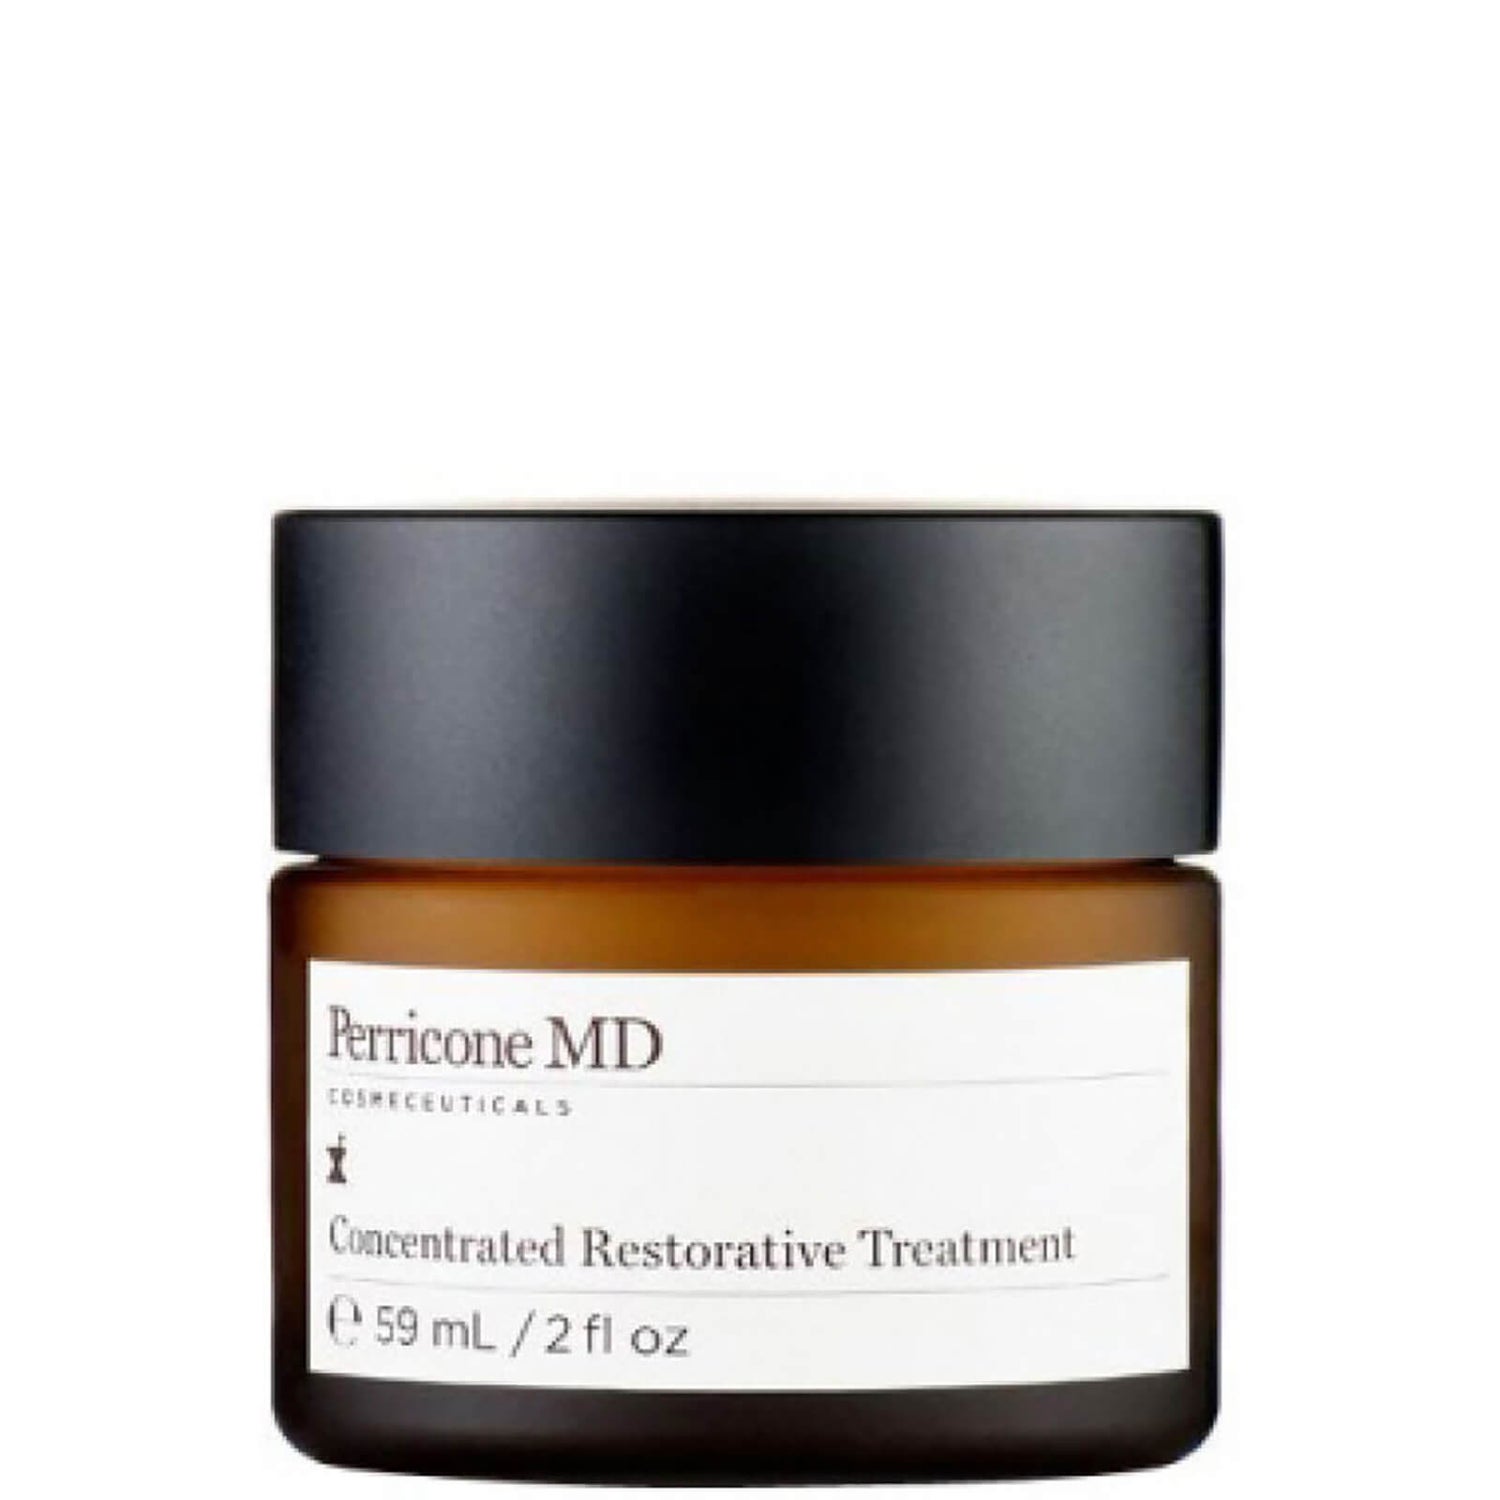 Perricone Md Concentrated Restorative Treatment (59 ml)